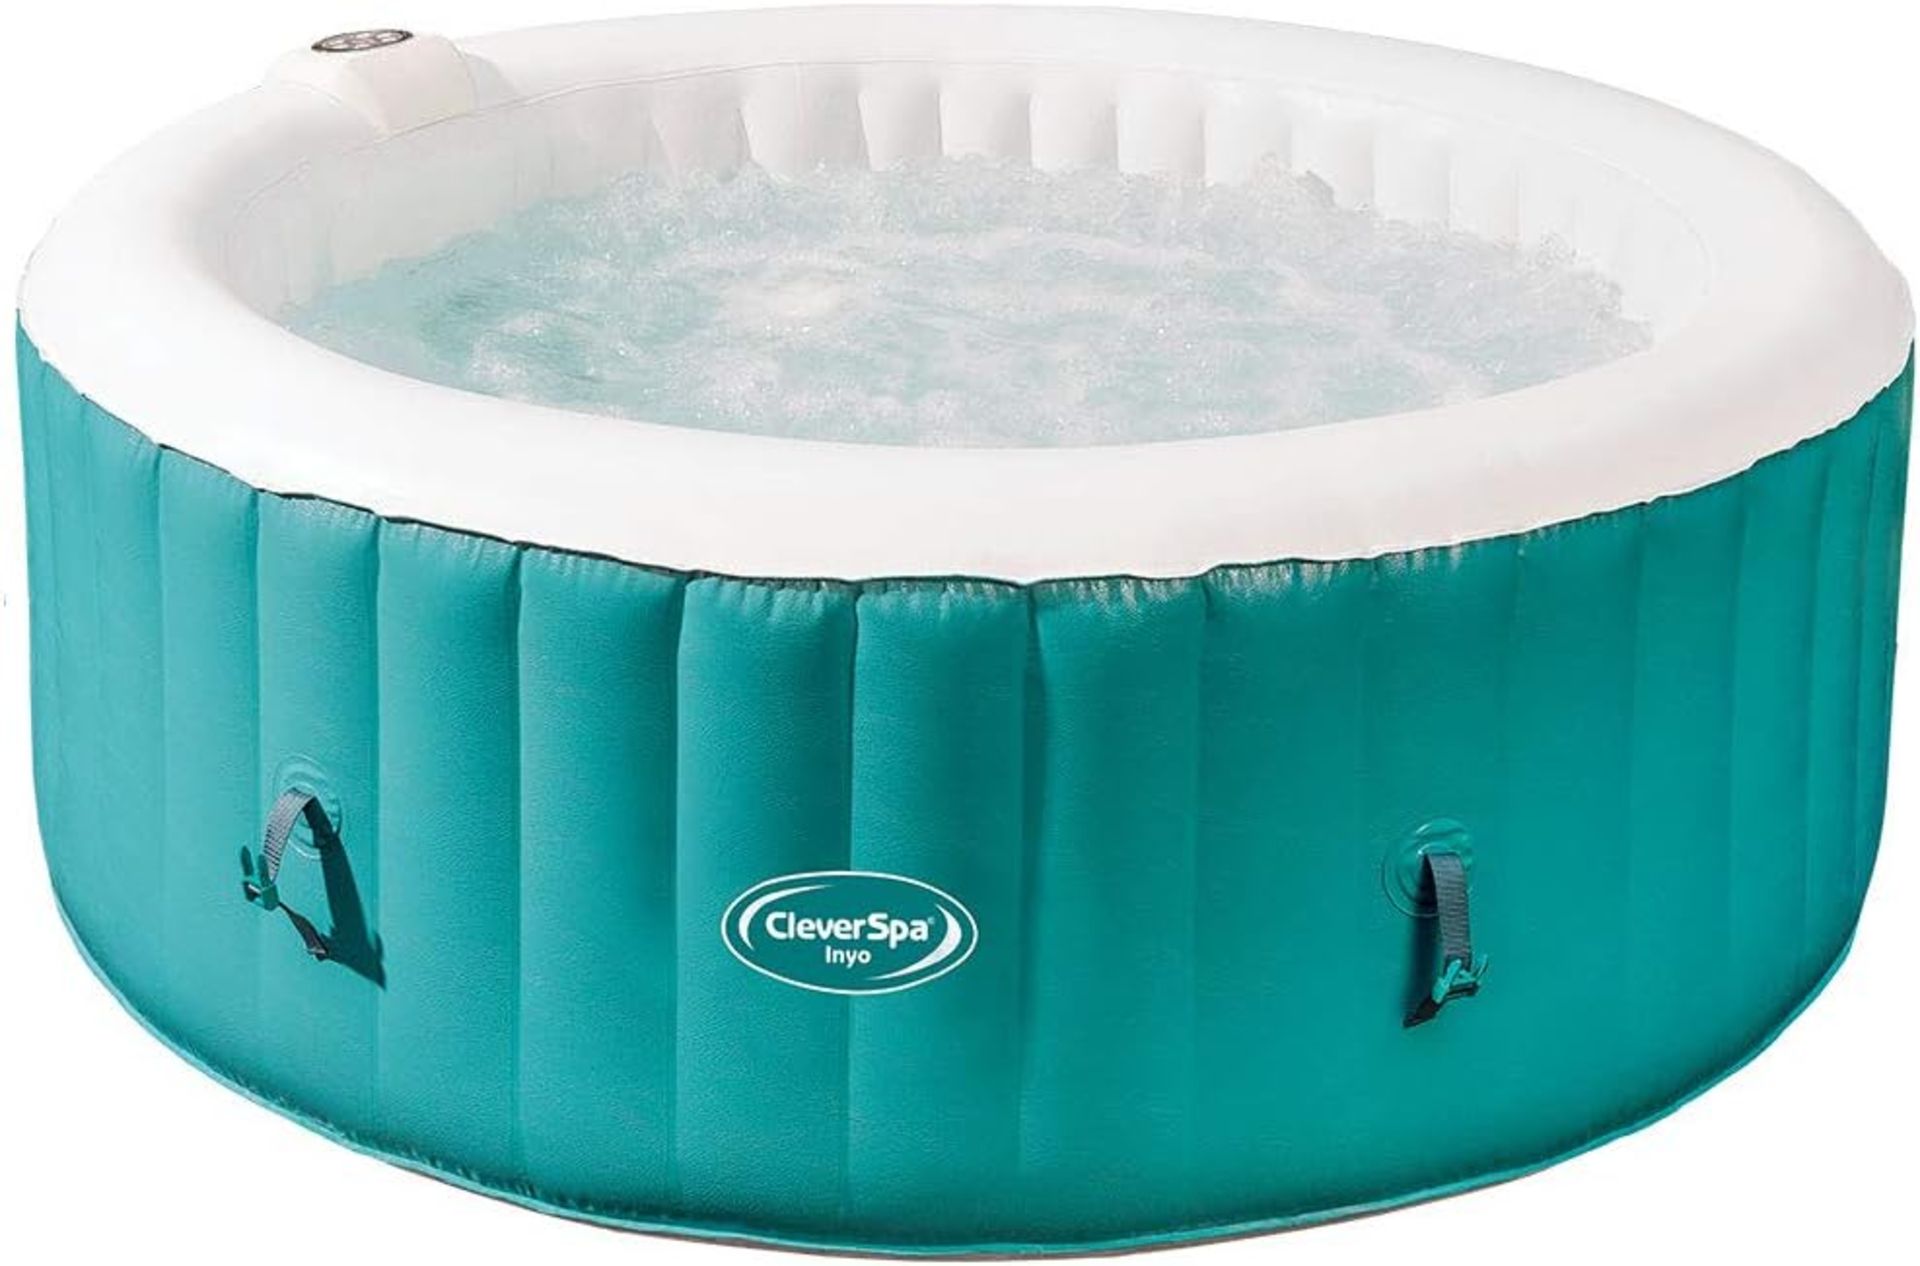 New & Boxed CleverSpa Inyo 4 Person Hot Tub. RRP £499.99. There is no occasion or family get - Image 2 of 4